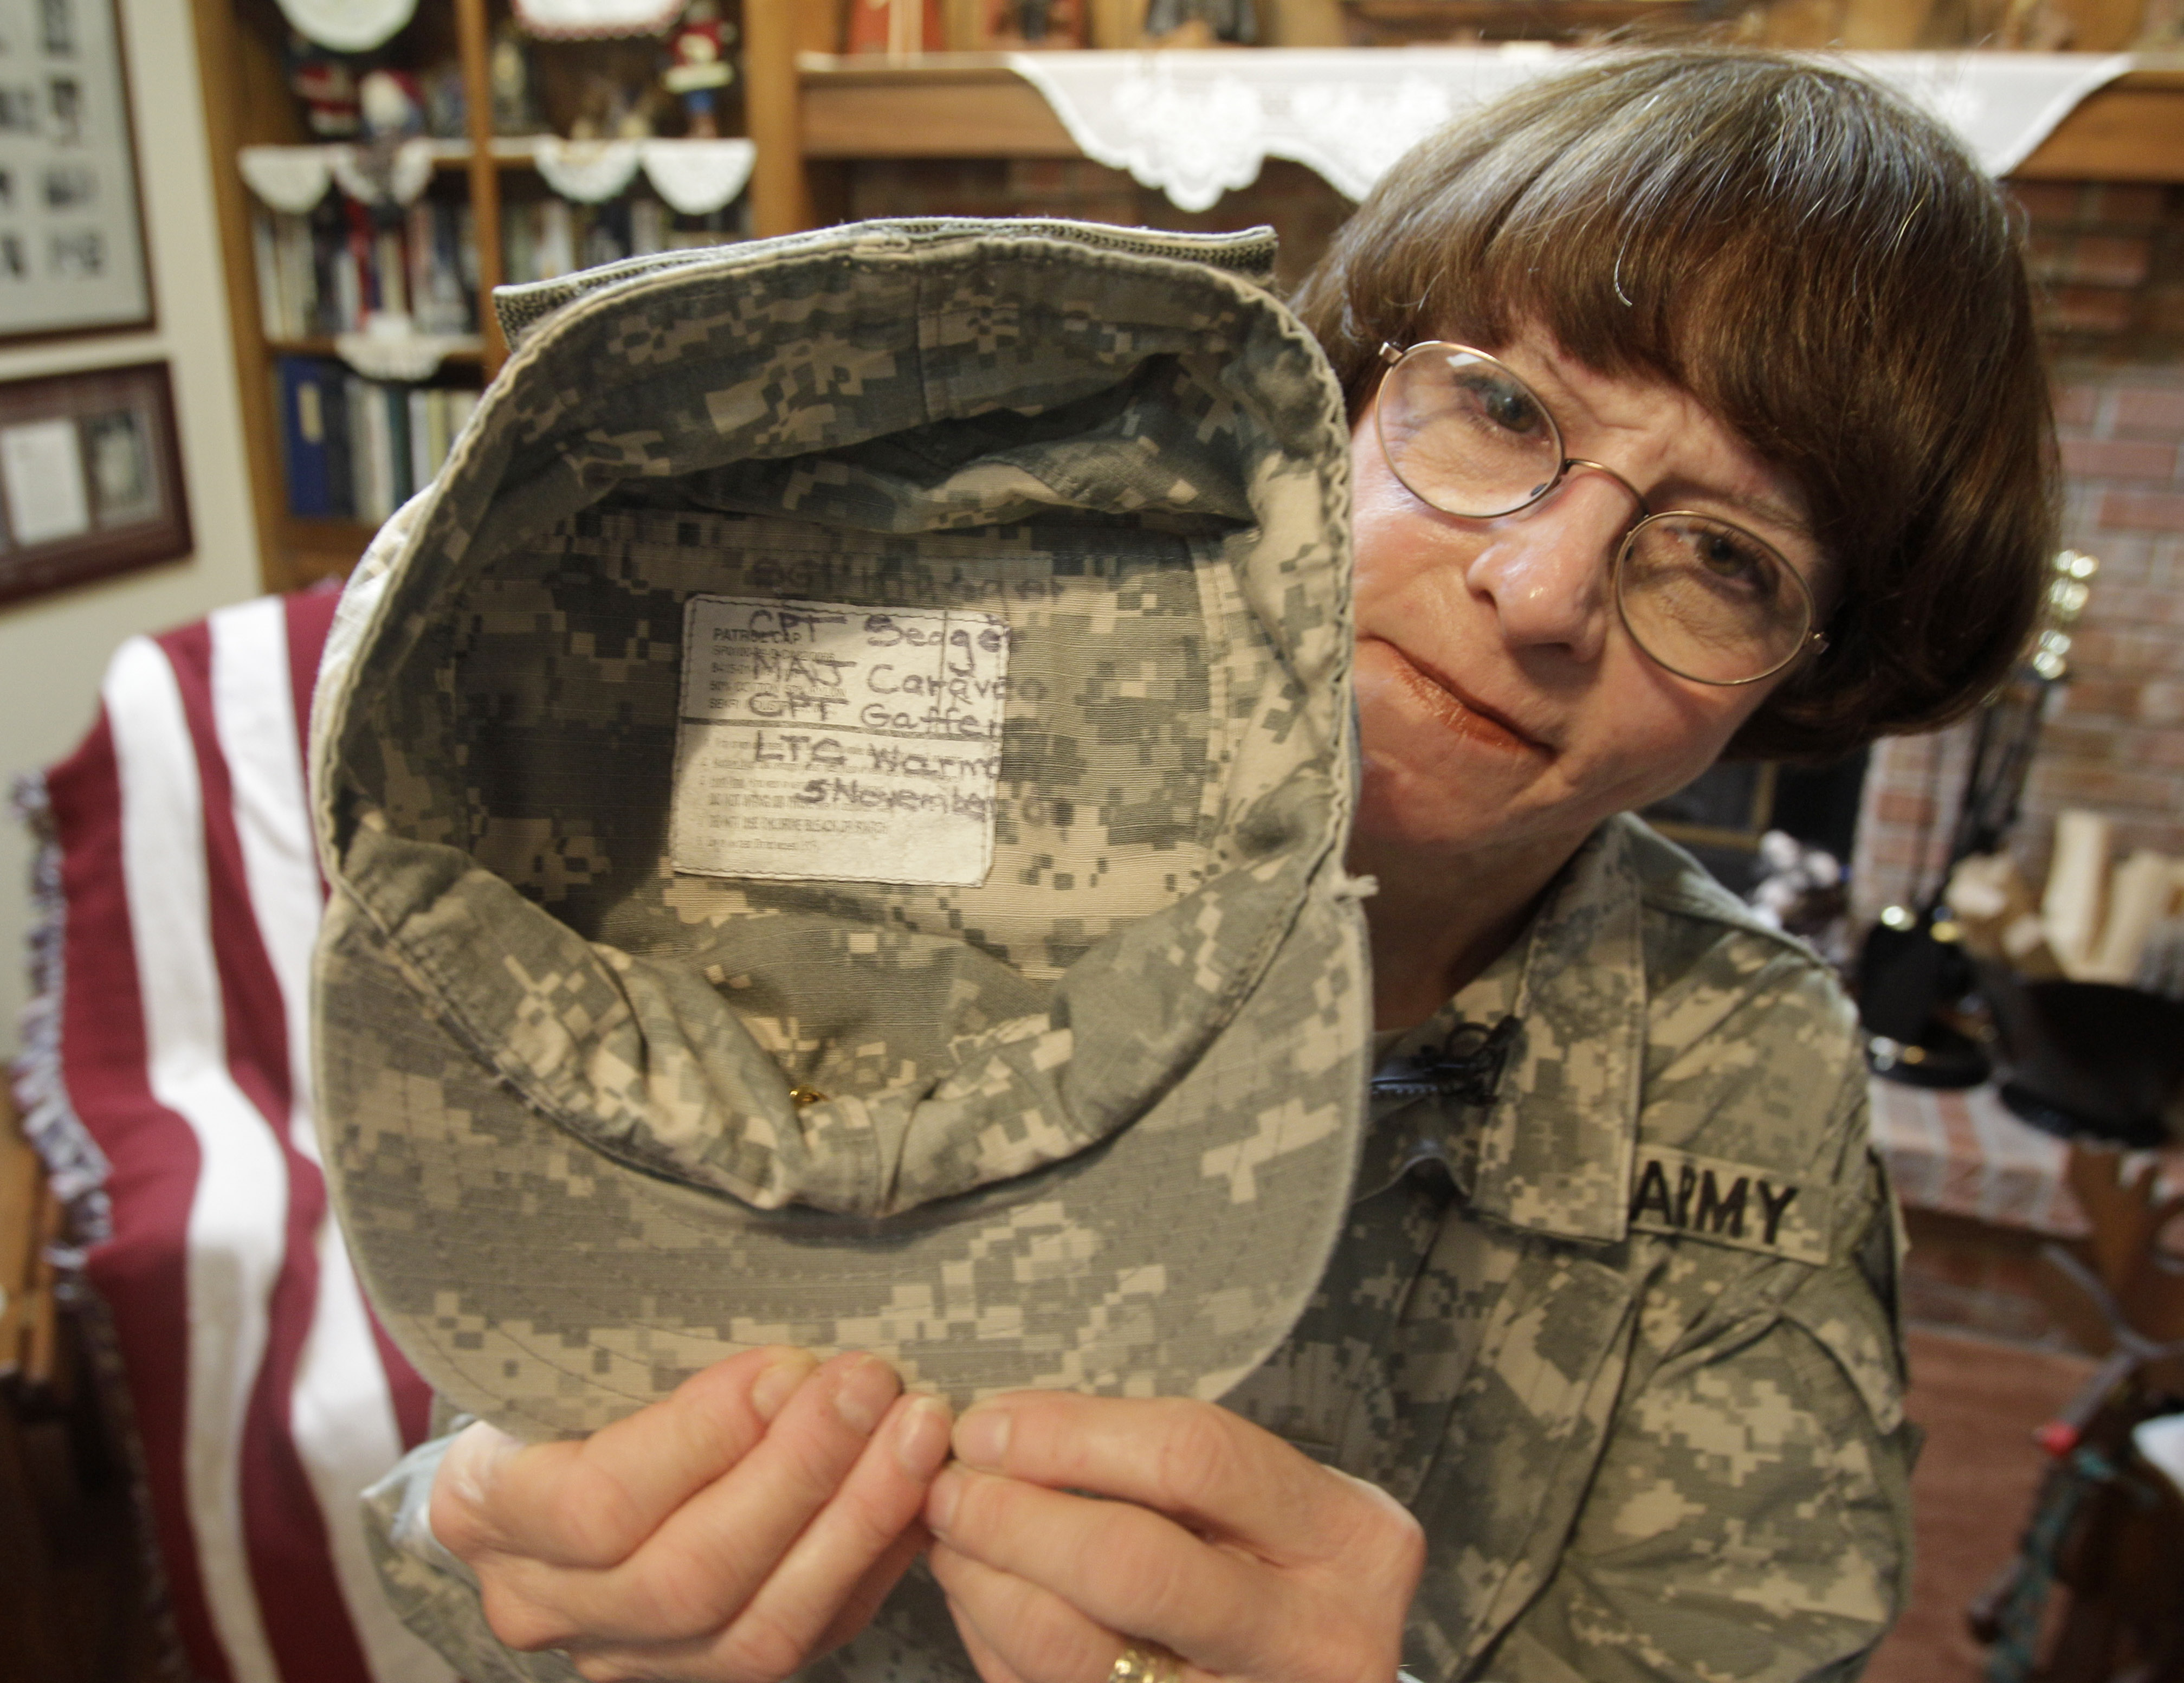 Kathy Platoni holds up her cap with the names of colleagues killed at Fort Hood in 2009 written inside. (Al Behrman—AP)